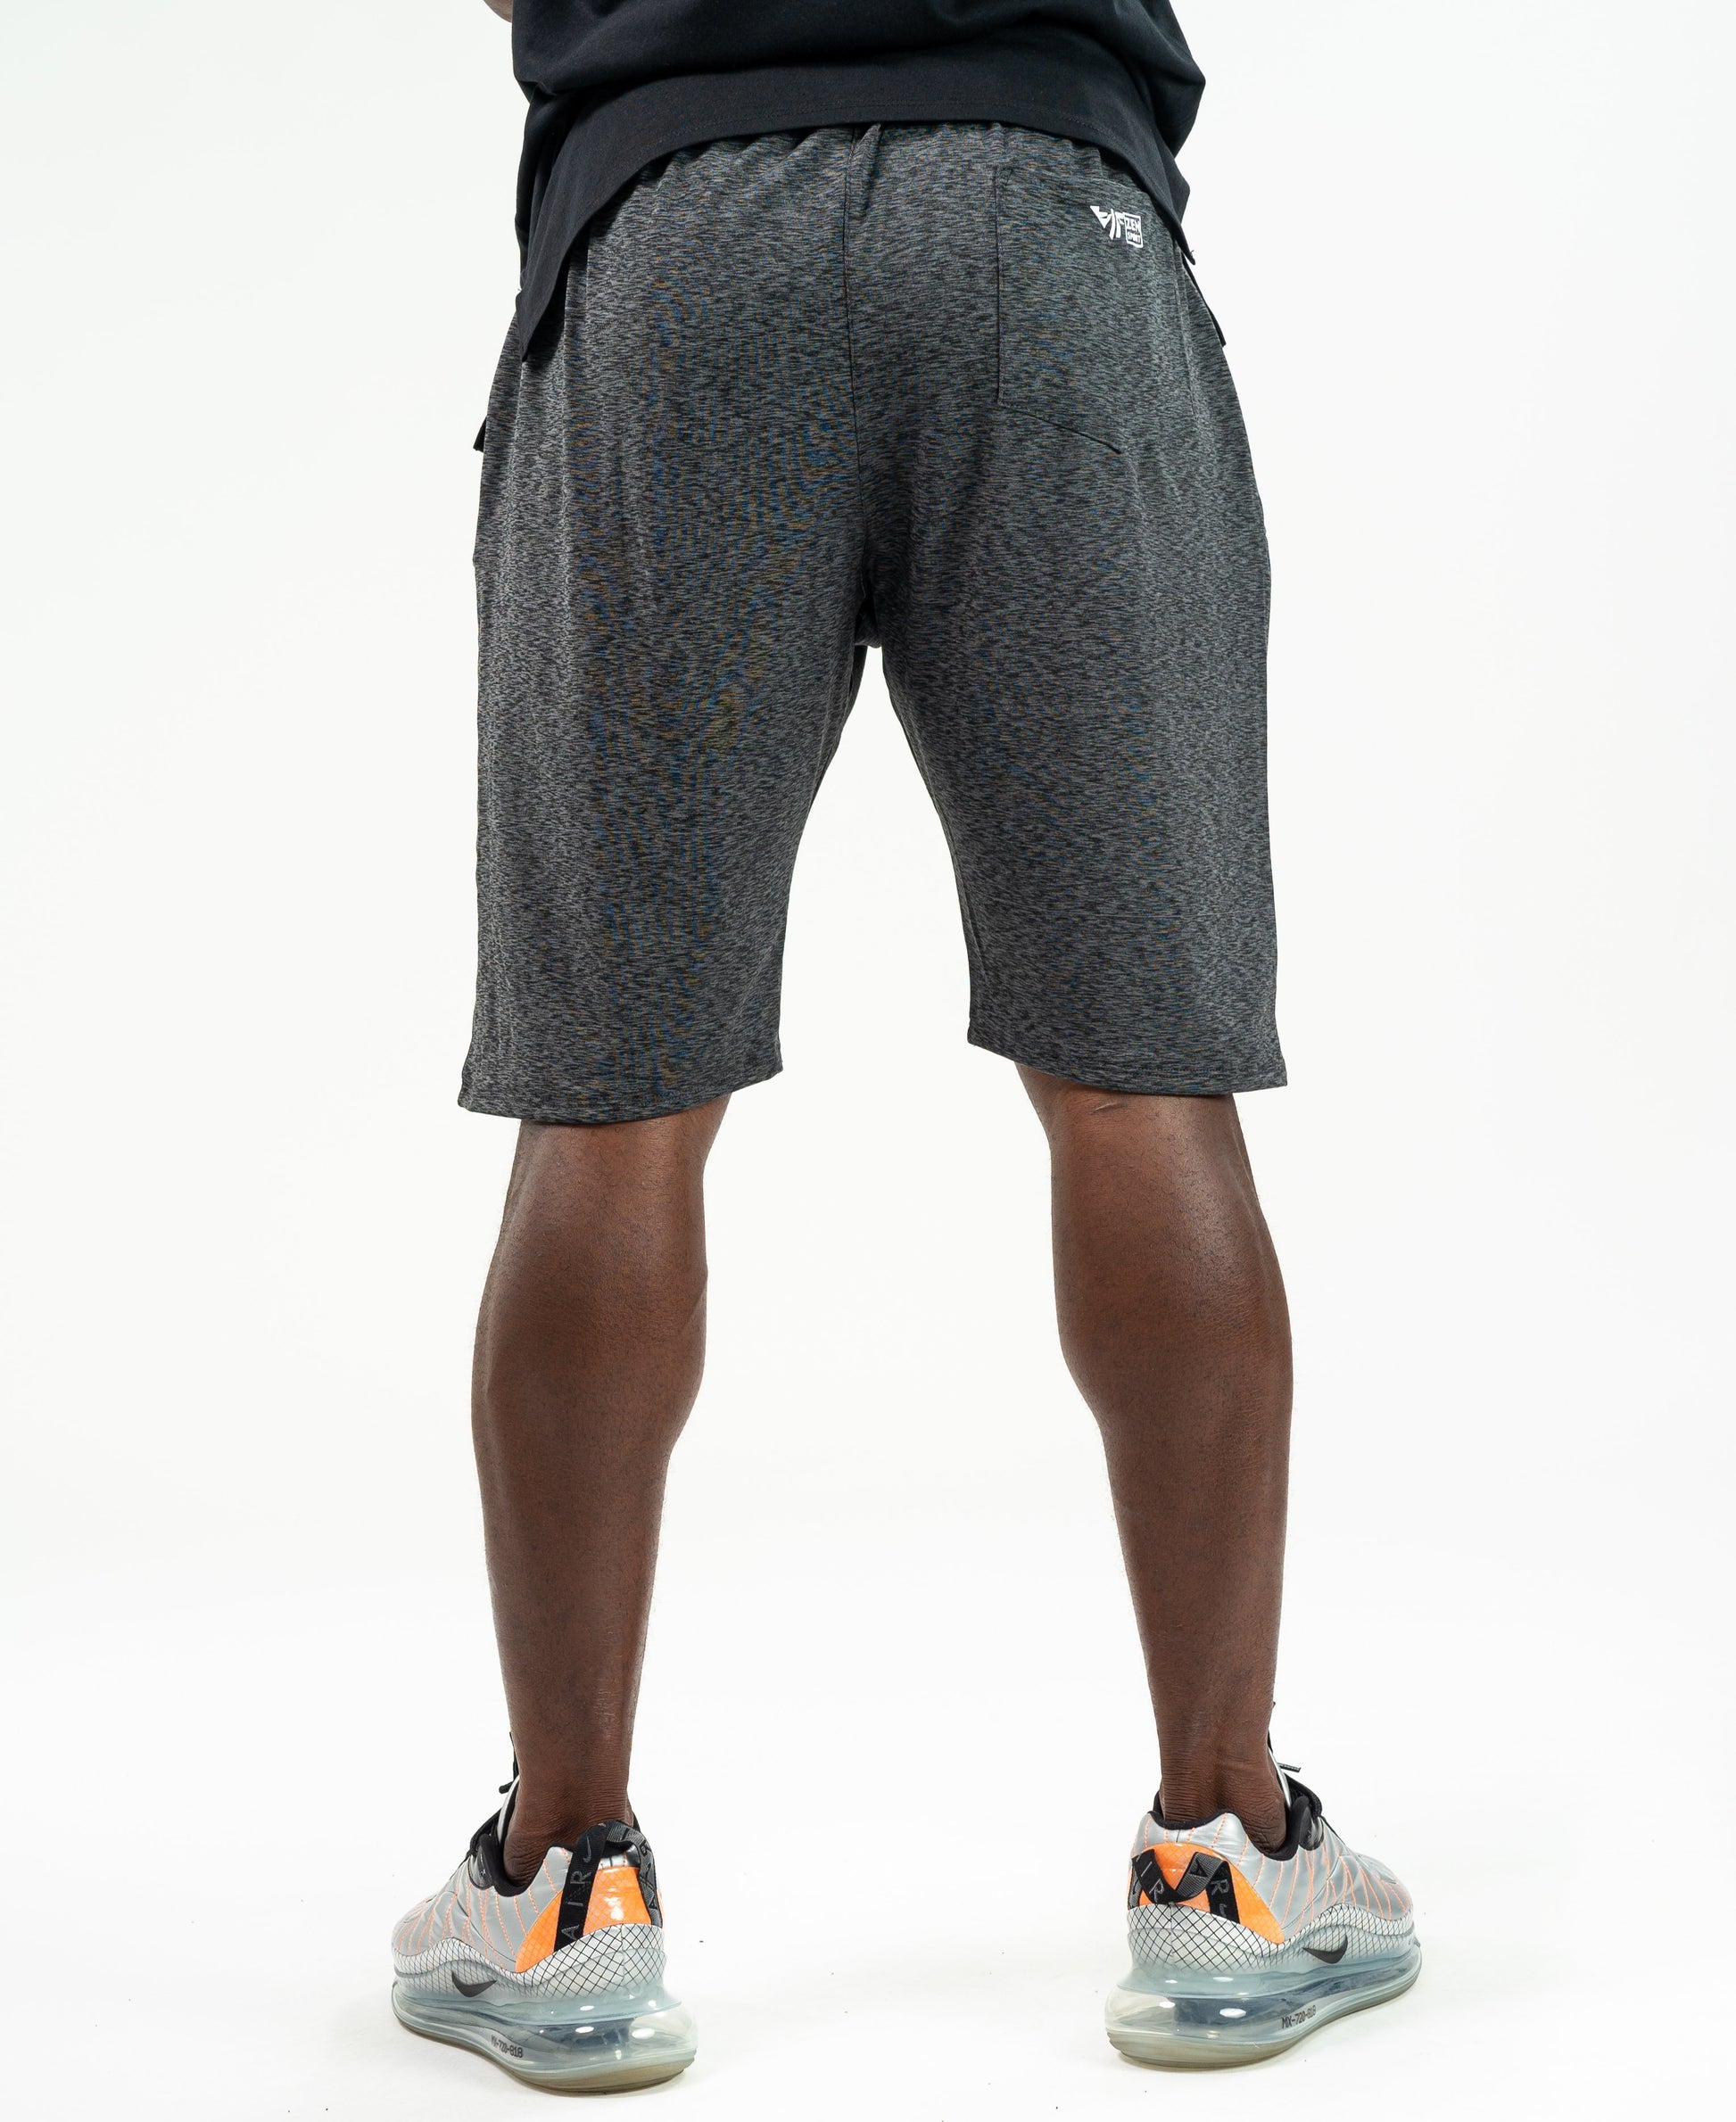 Short trousers - Fatai Style